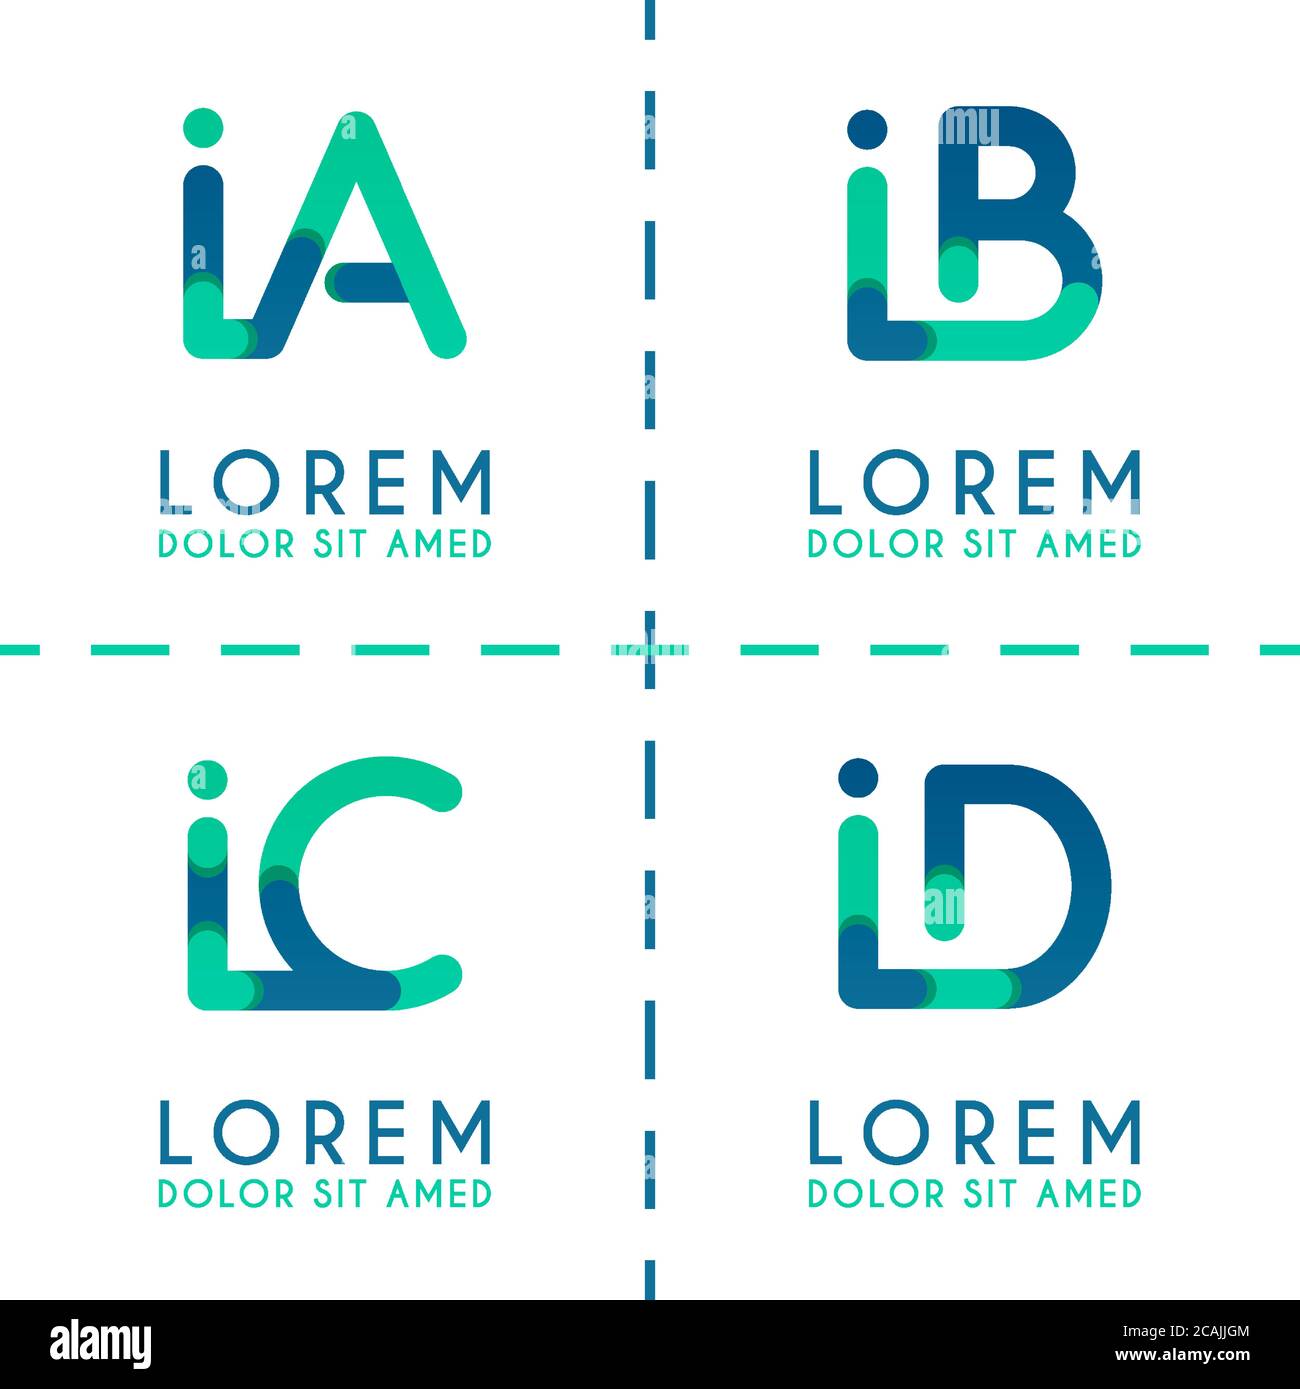 IA logo for businesses and companies. IB template logo for poster  design. IC logo illustration can be for websites and apps. Letter ID logo for socia Stock Vector